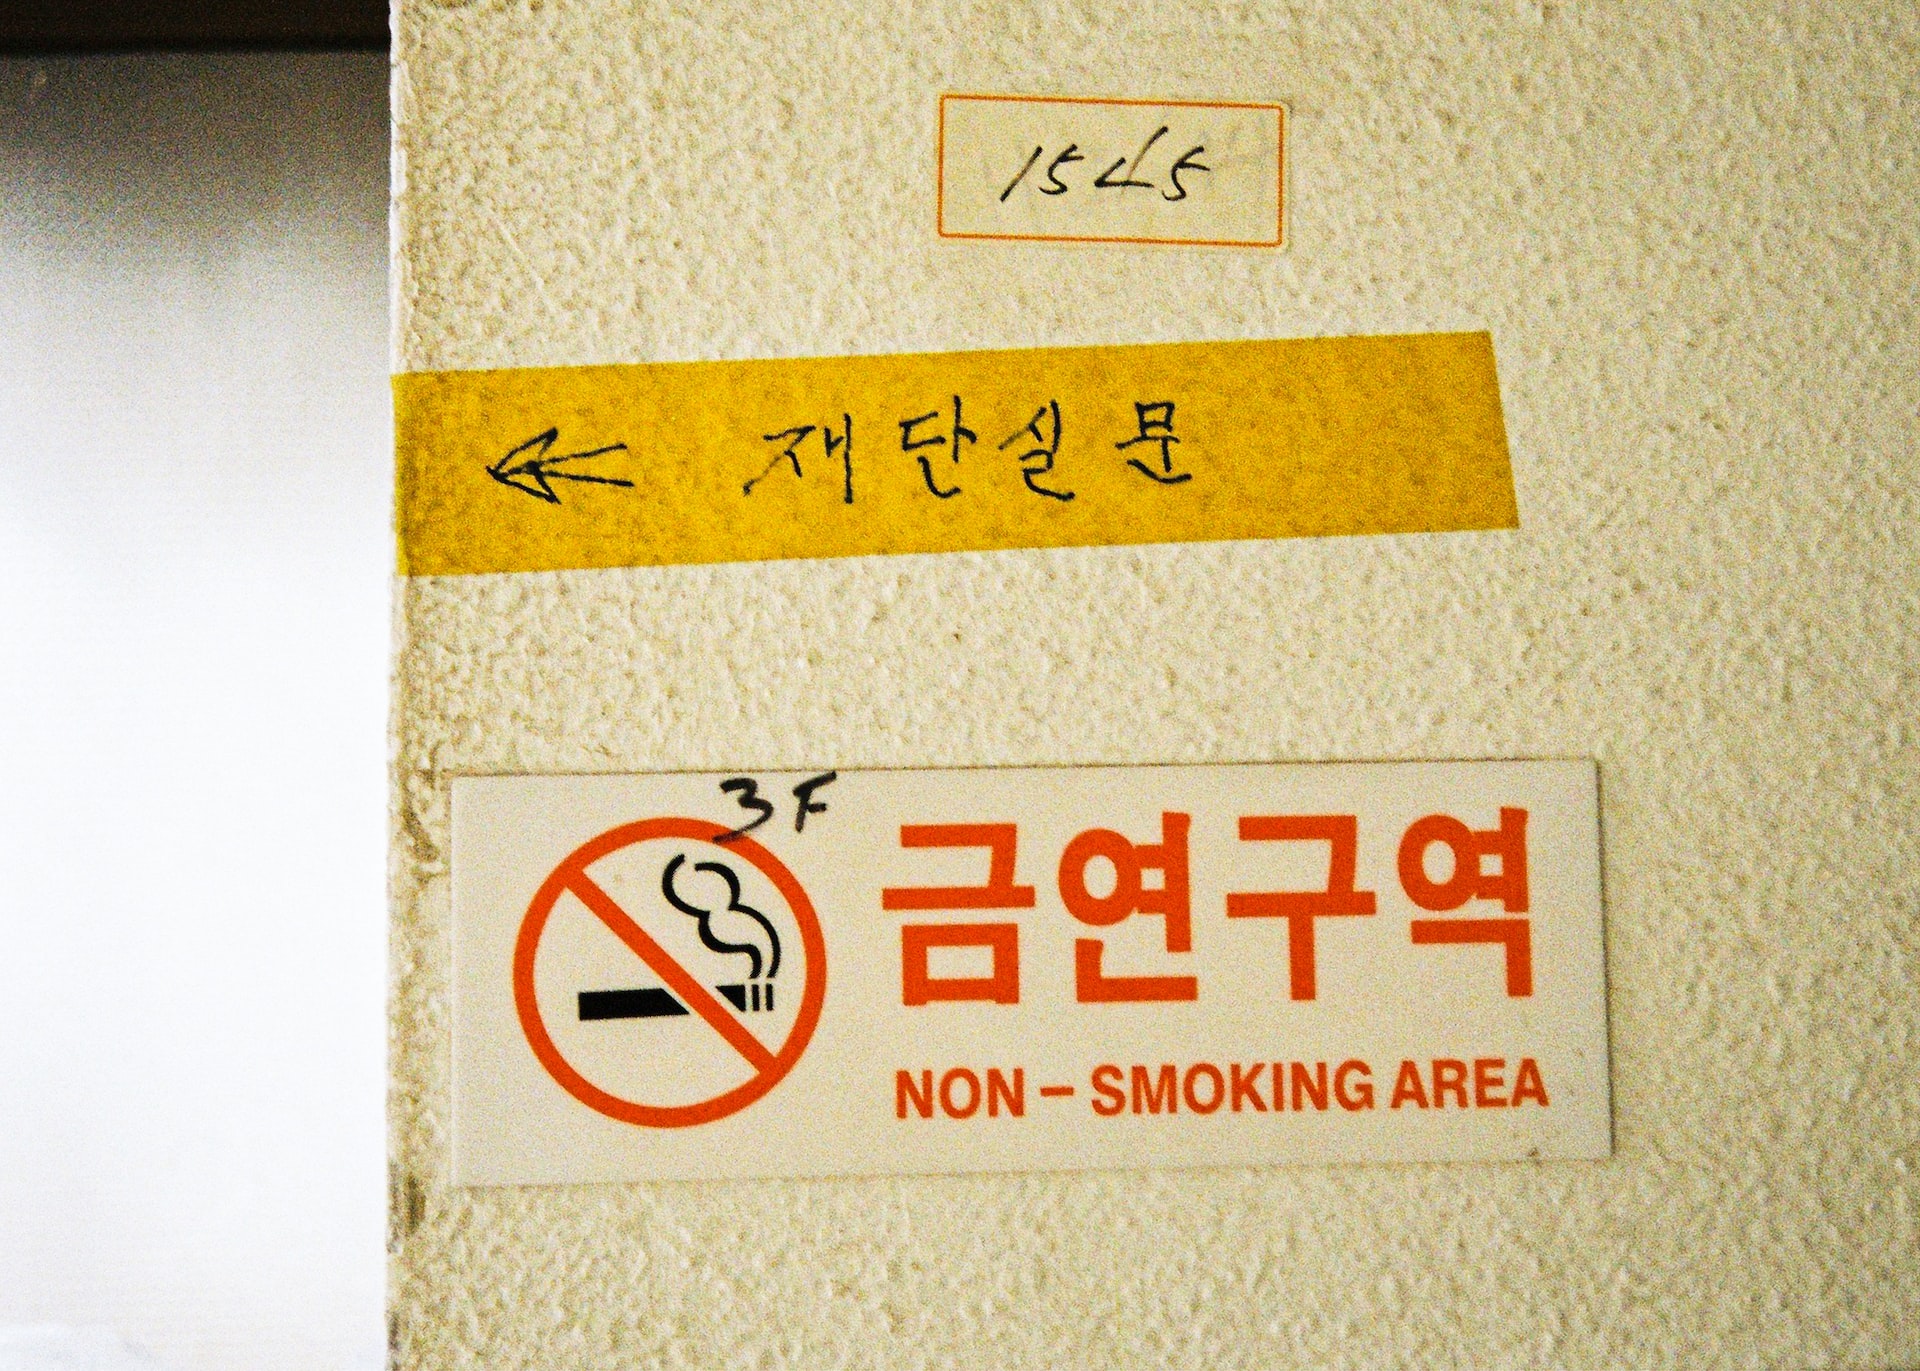 A ‘non-smoking area’ sign on a wall in Korean with English translation